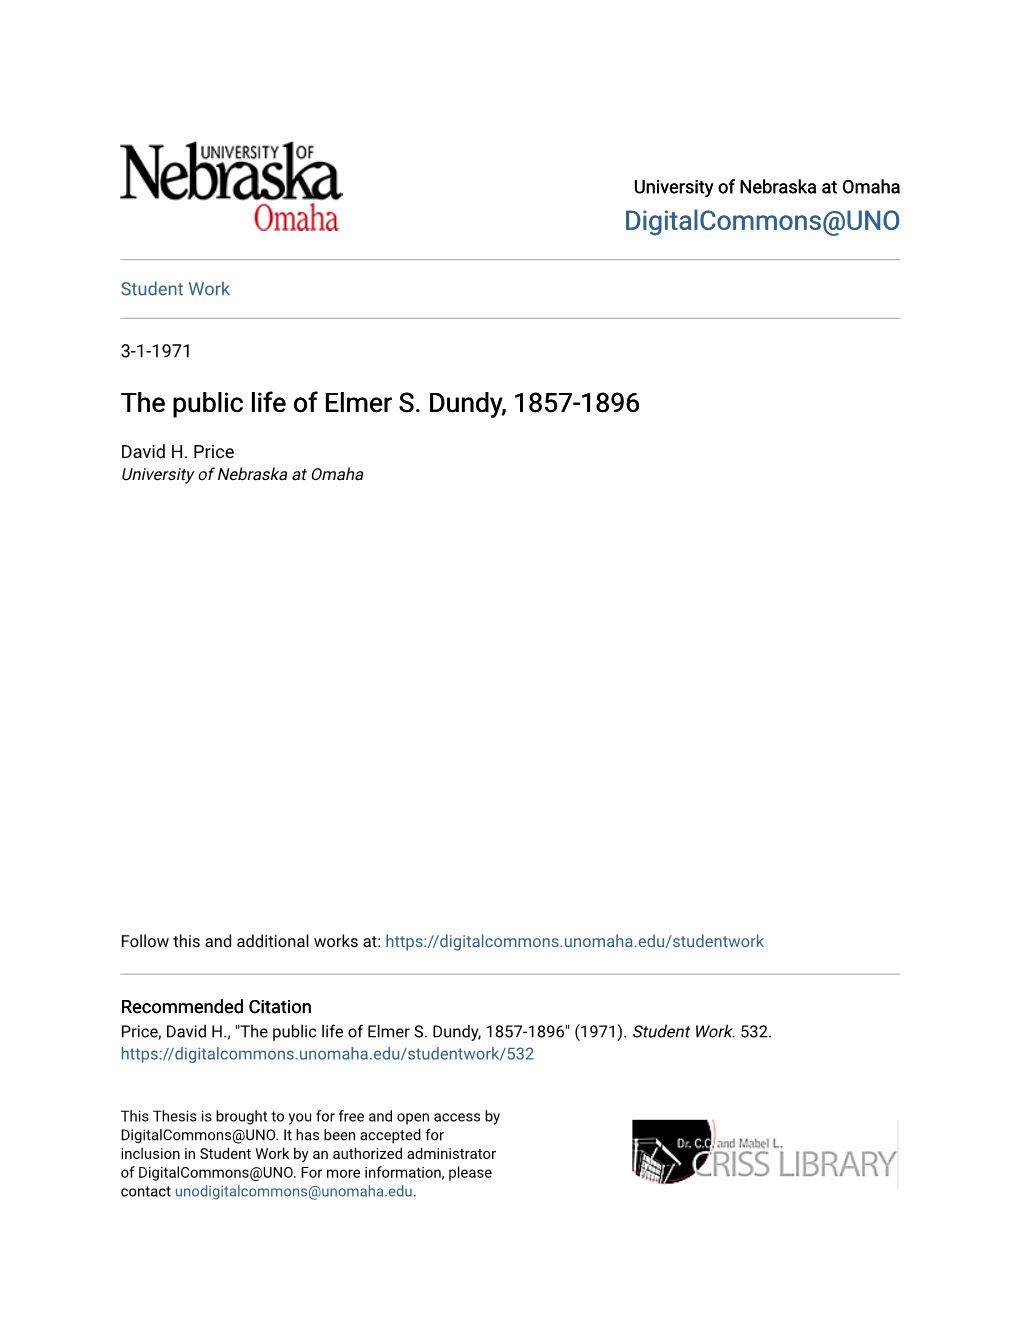 The Public Life of Elmer S. Dundy, 1857-1896